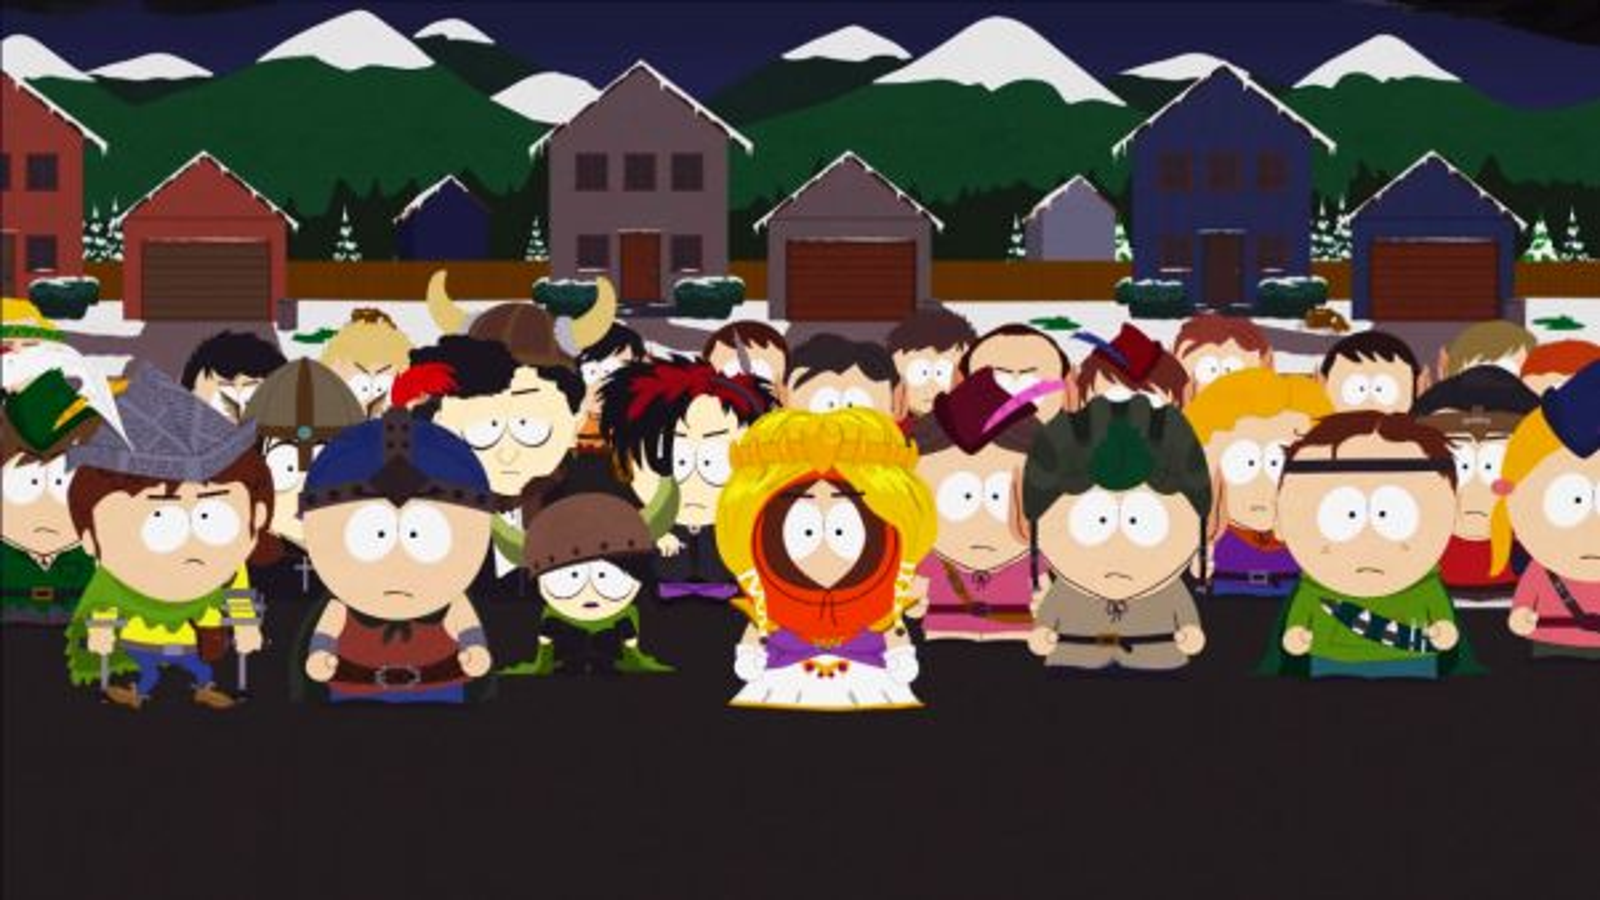 Save 75% on South Park™: The Stick of Truth™ on Steam